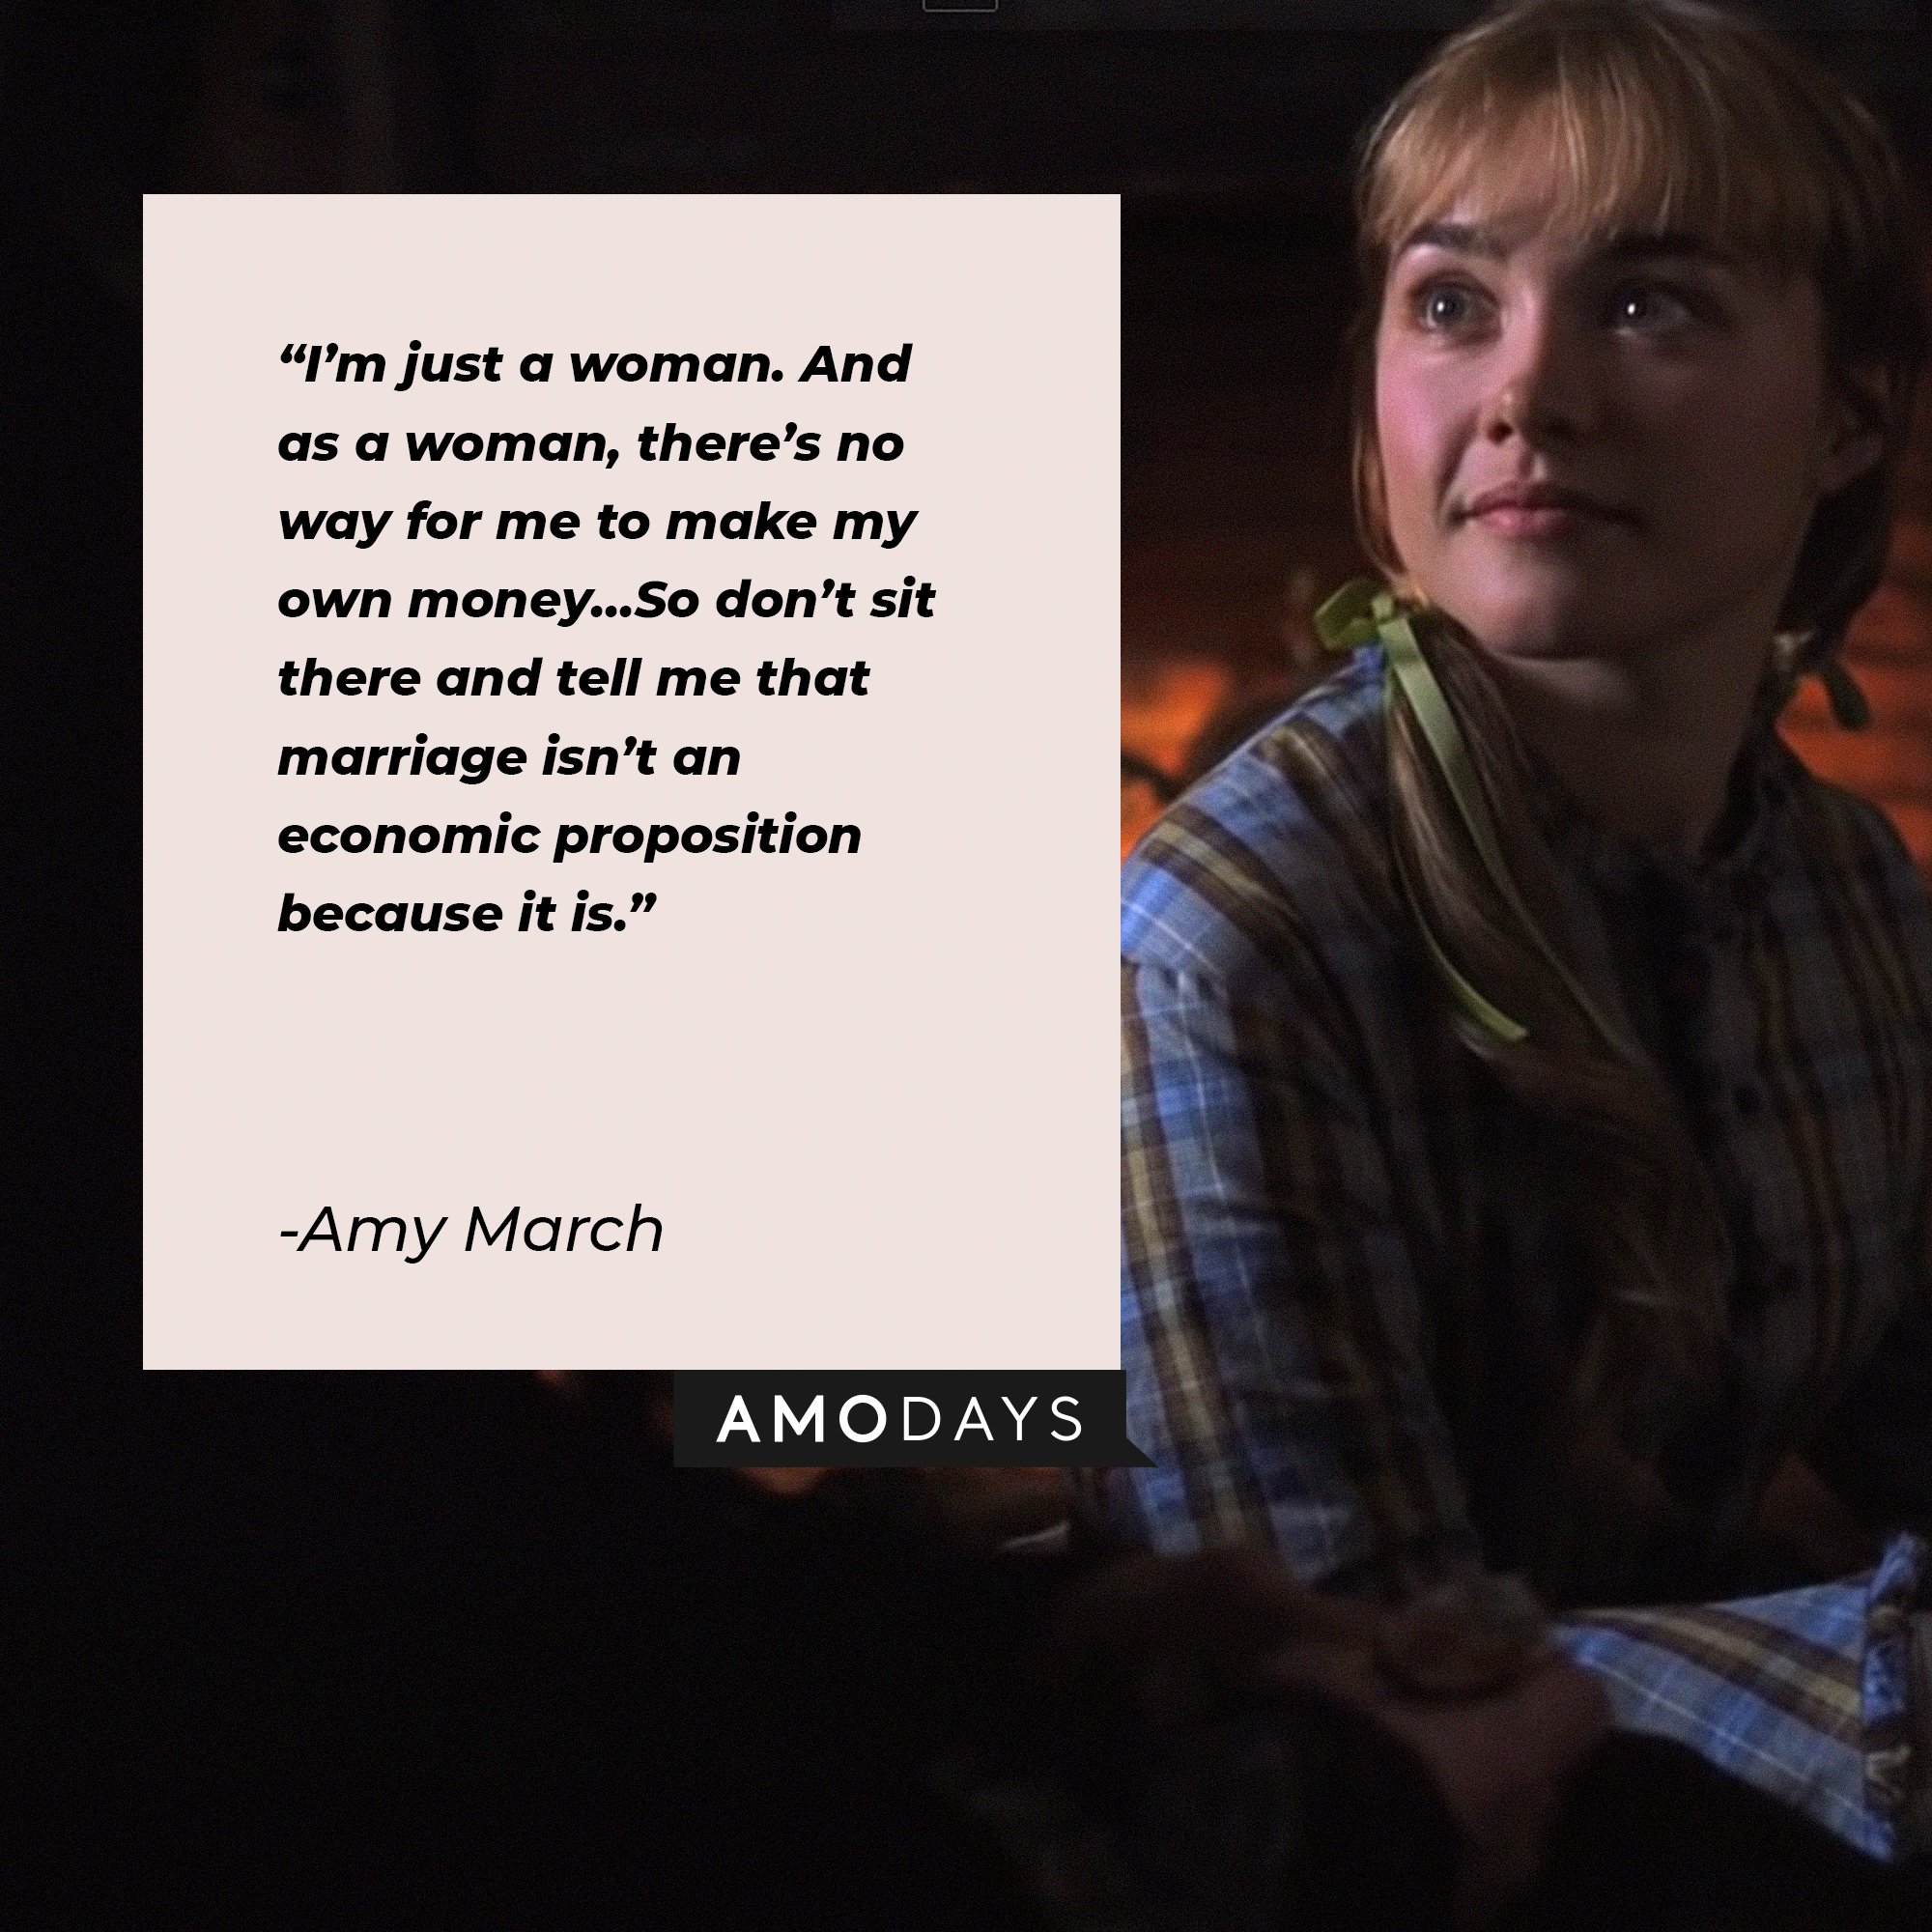 Amy March's quote: “I’m just a woman. And as a woman, there’s no way for me to make my own money…So don’t sit there and tell me that marriage isn’t an economic proposition because it is.”  | Image: AmoDays